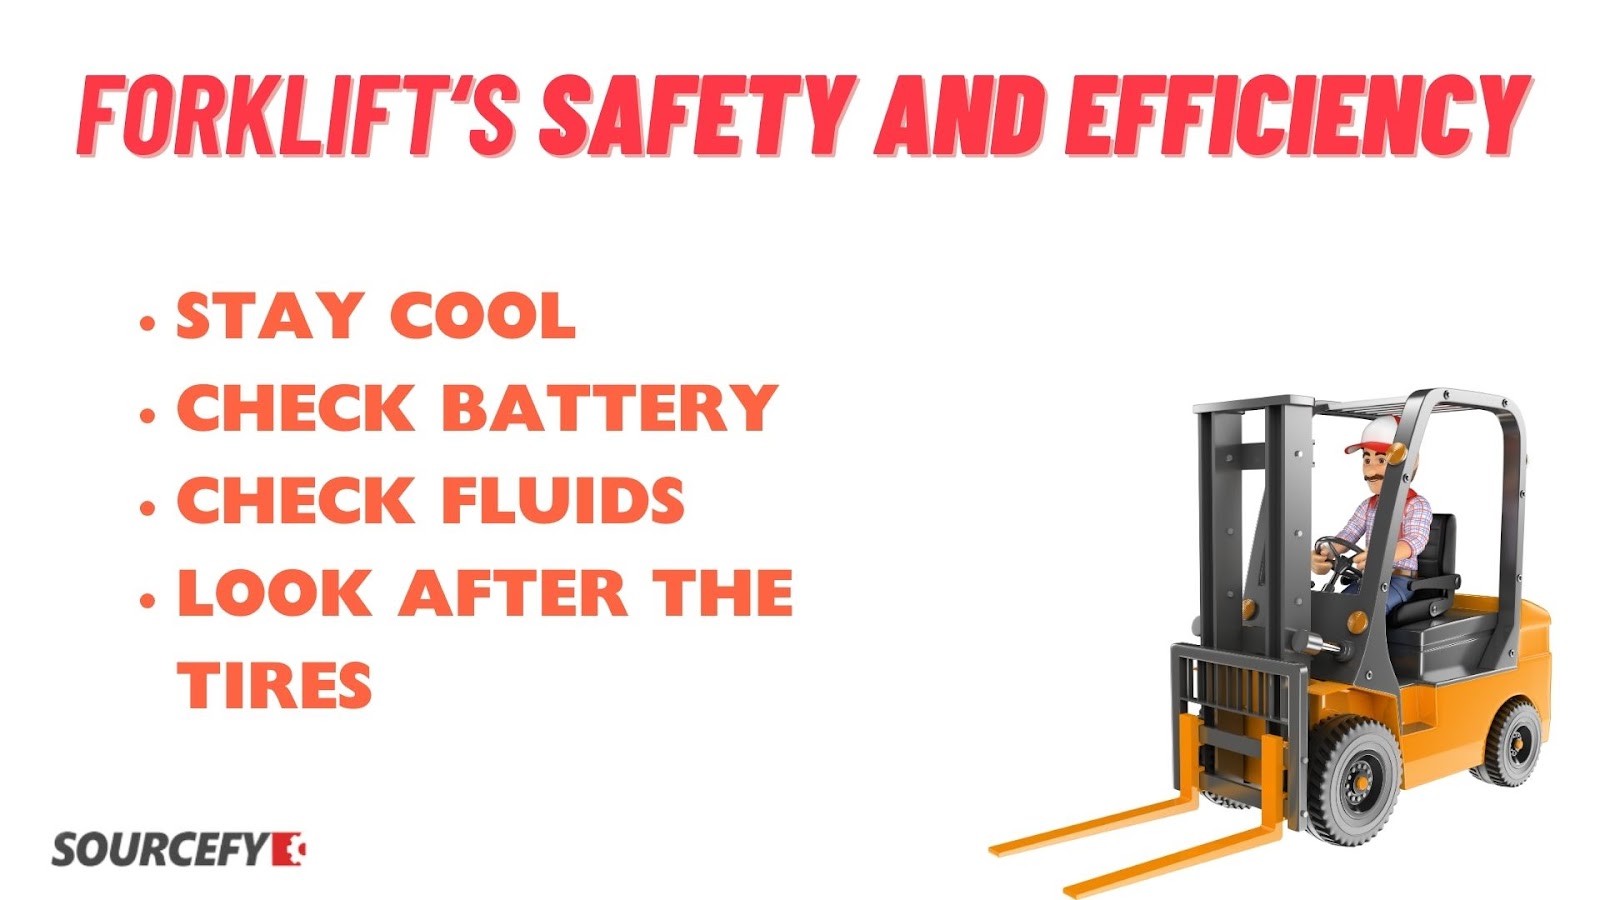 Forklift's Safety and Efficiency